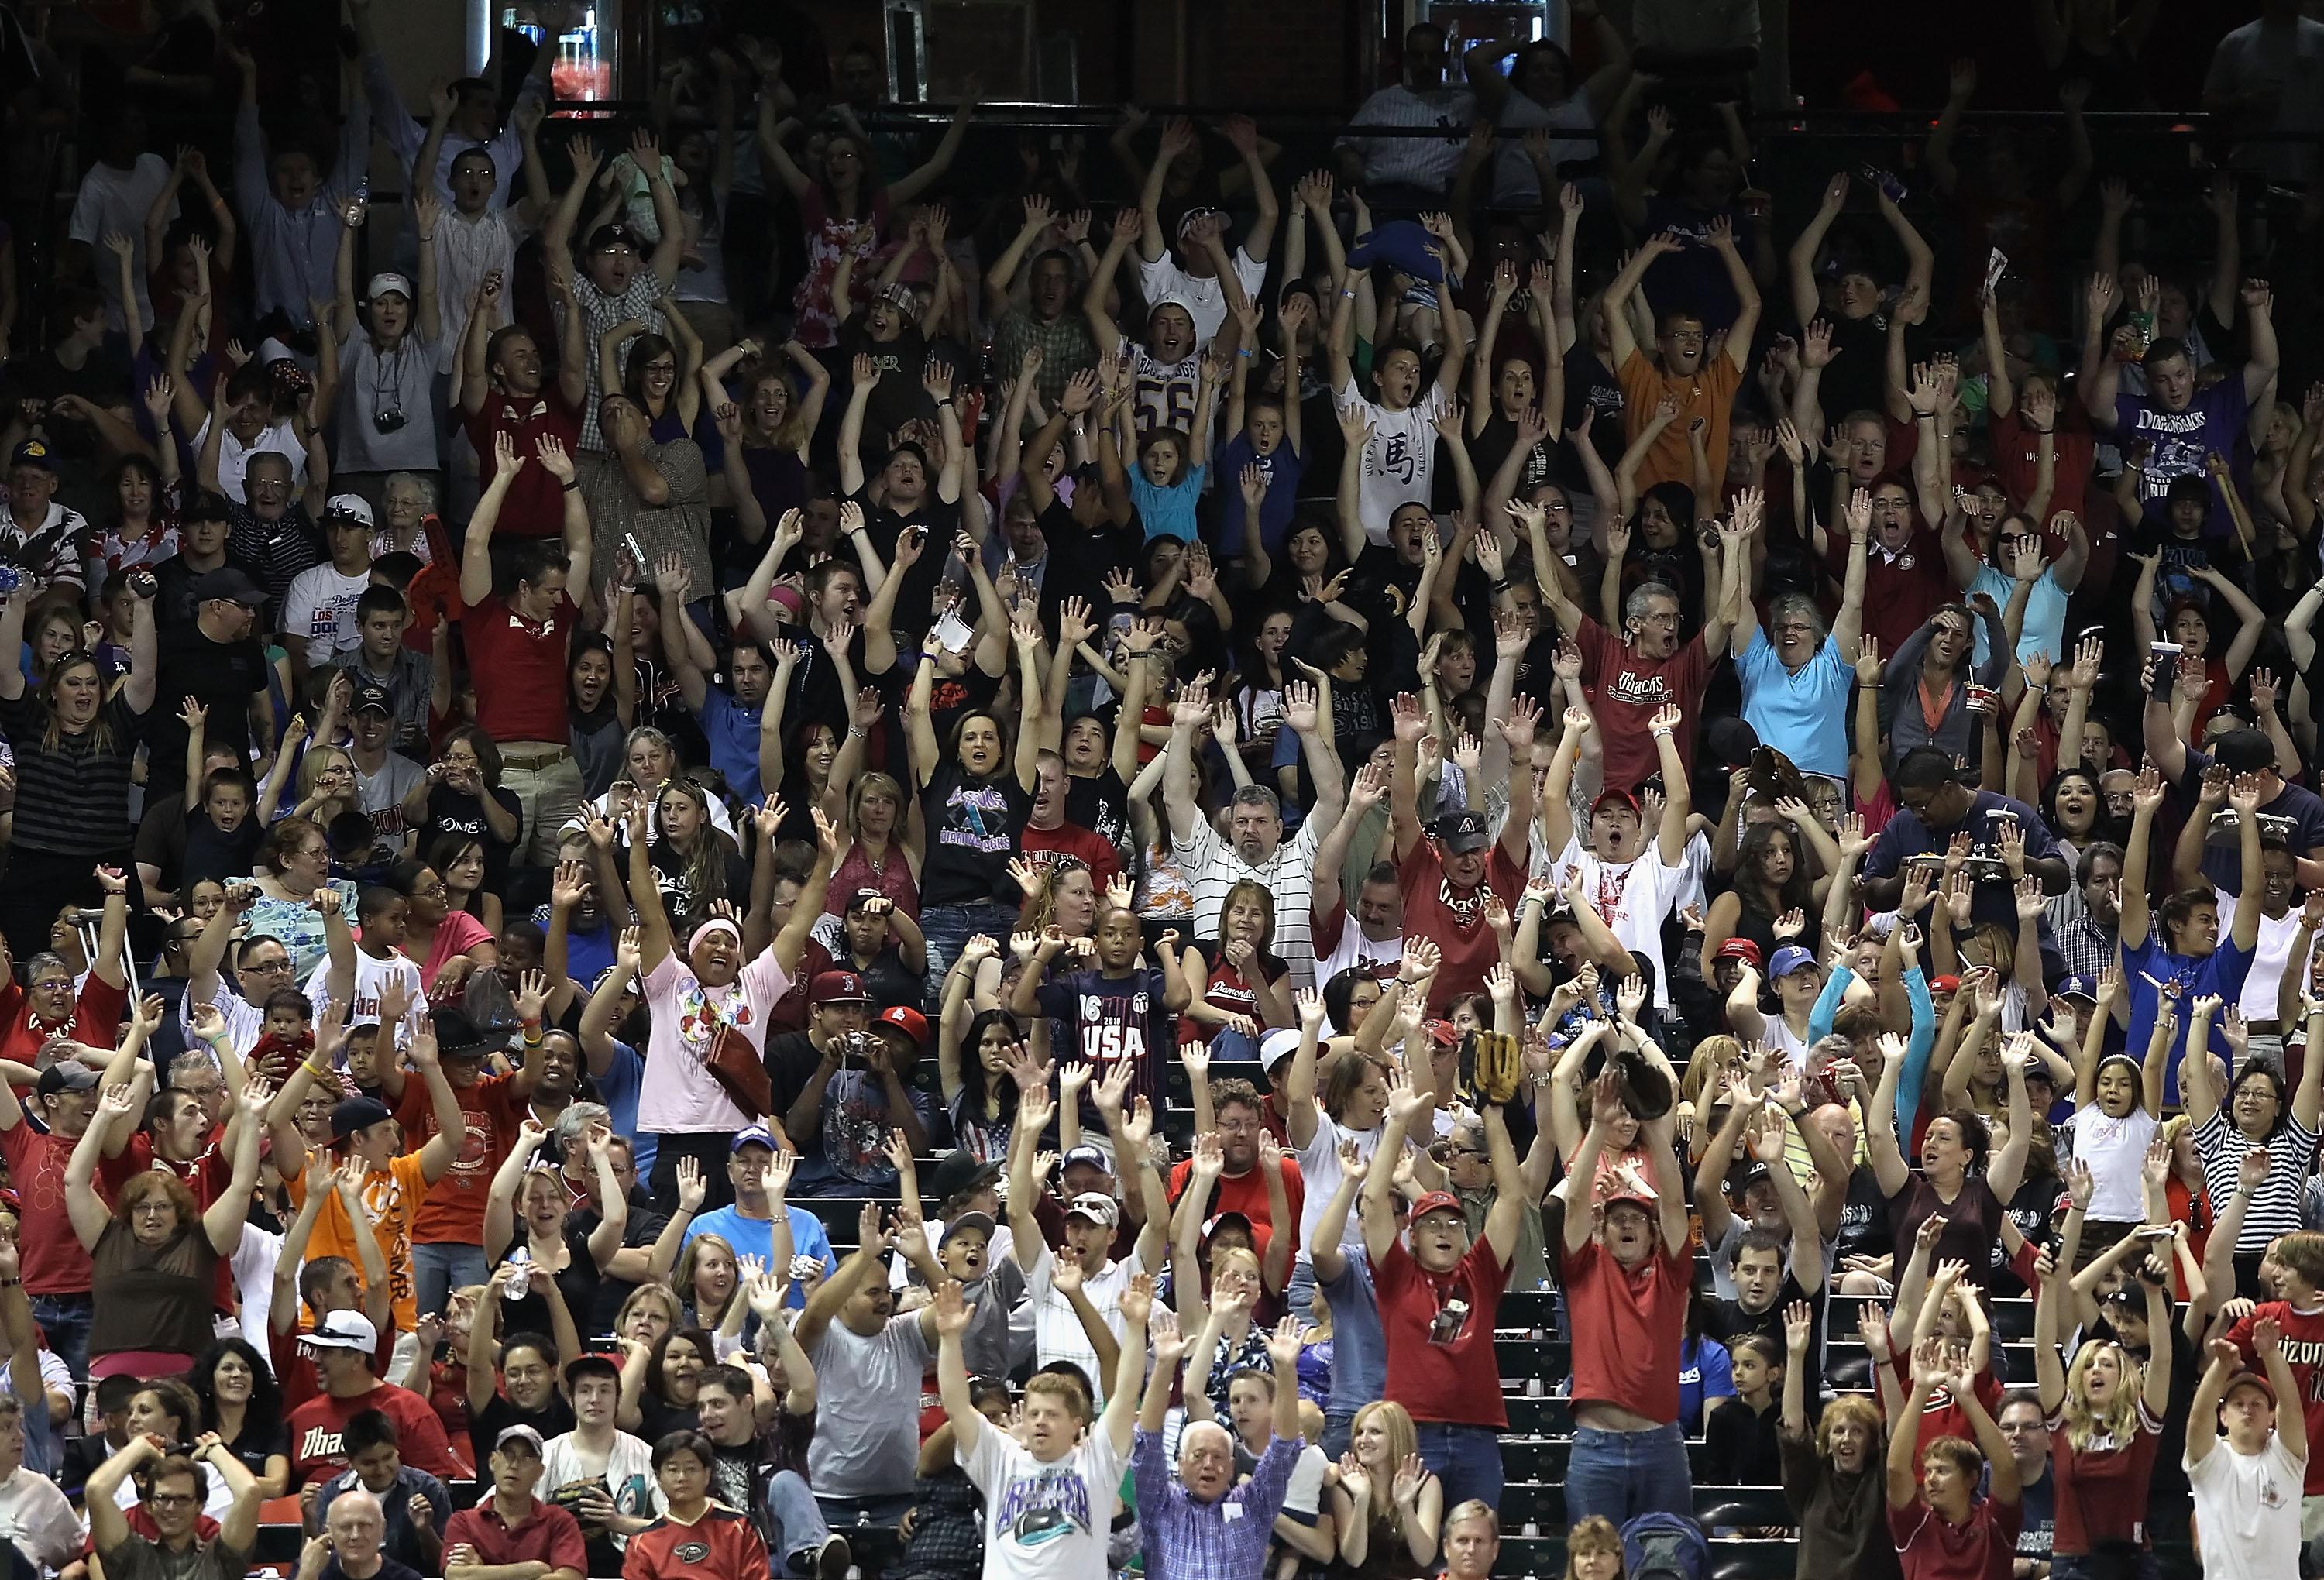 PHOENIX - SEPTEMBER 24:  Fans do the wave during the Major League Baseball game between the Los Angeles Dodgers and the Arizona Diamondbacks at Chase Field on September 24, 2010 in Phoenix, Arizona.  (Photo by Christian Petersen/Getty Images)